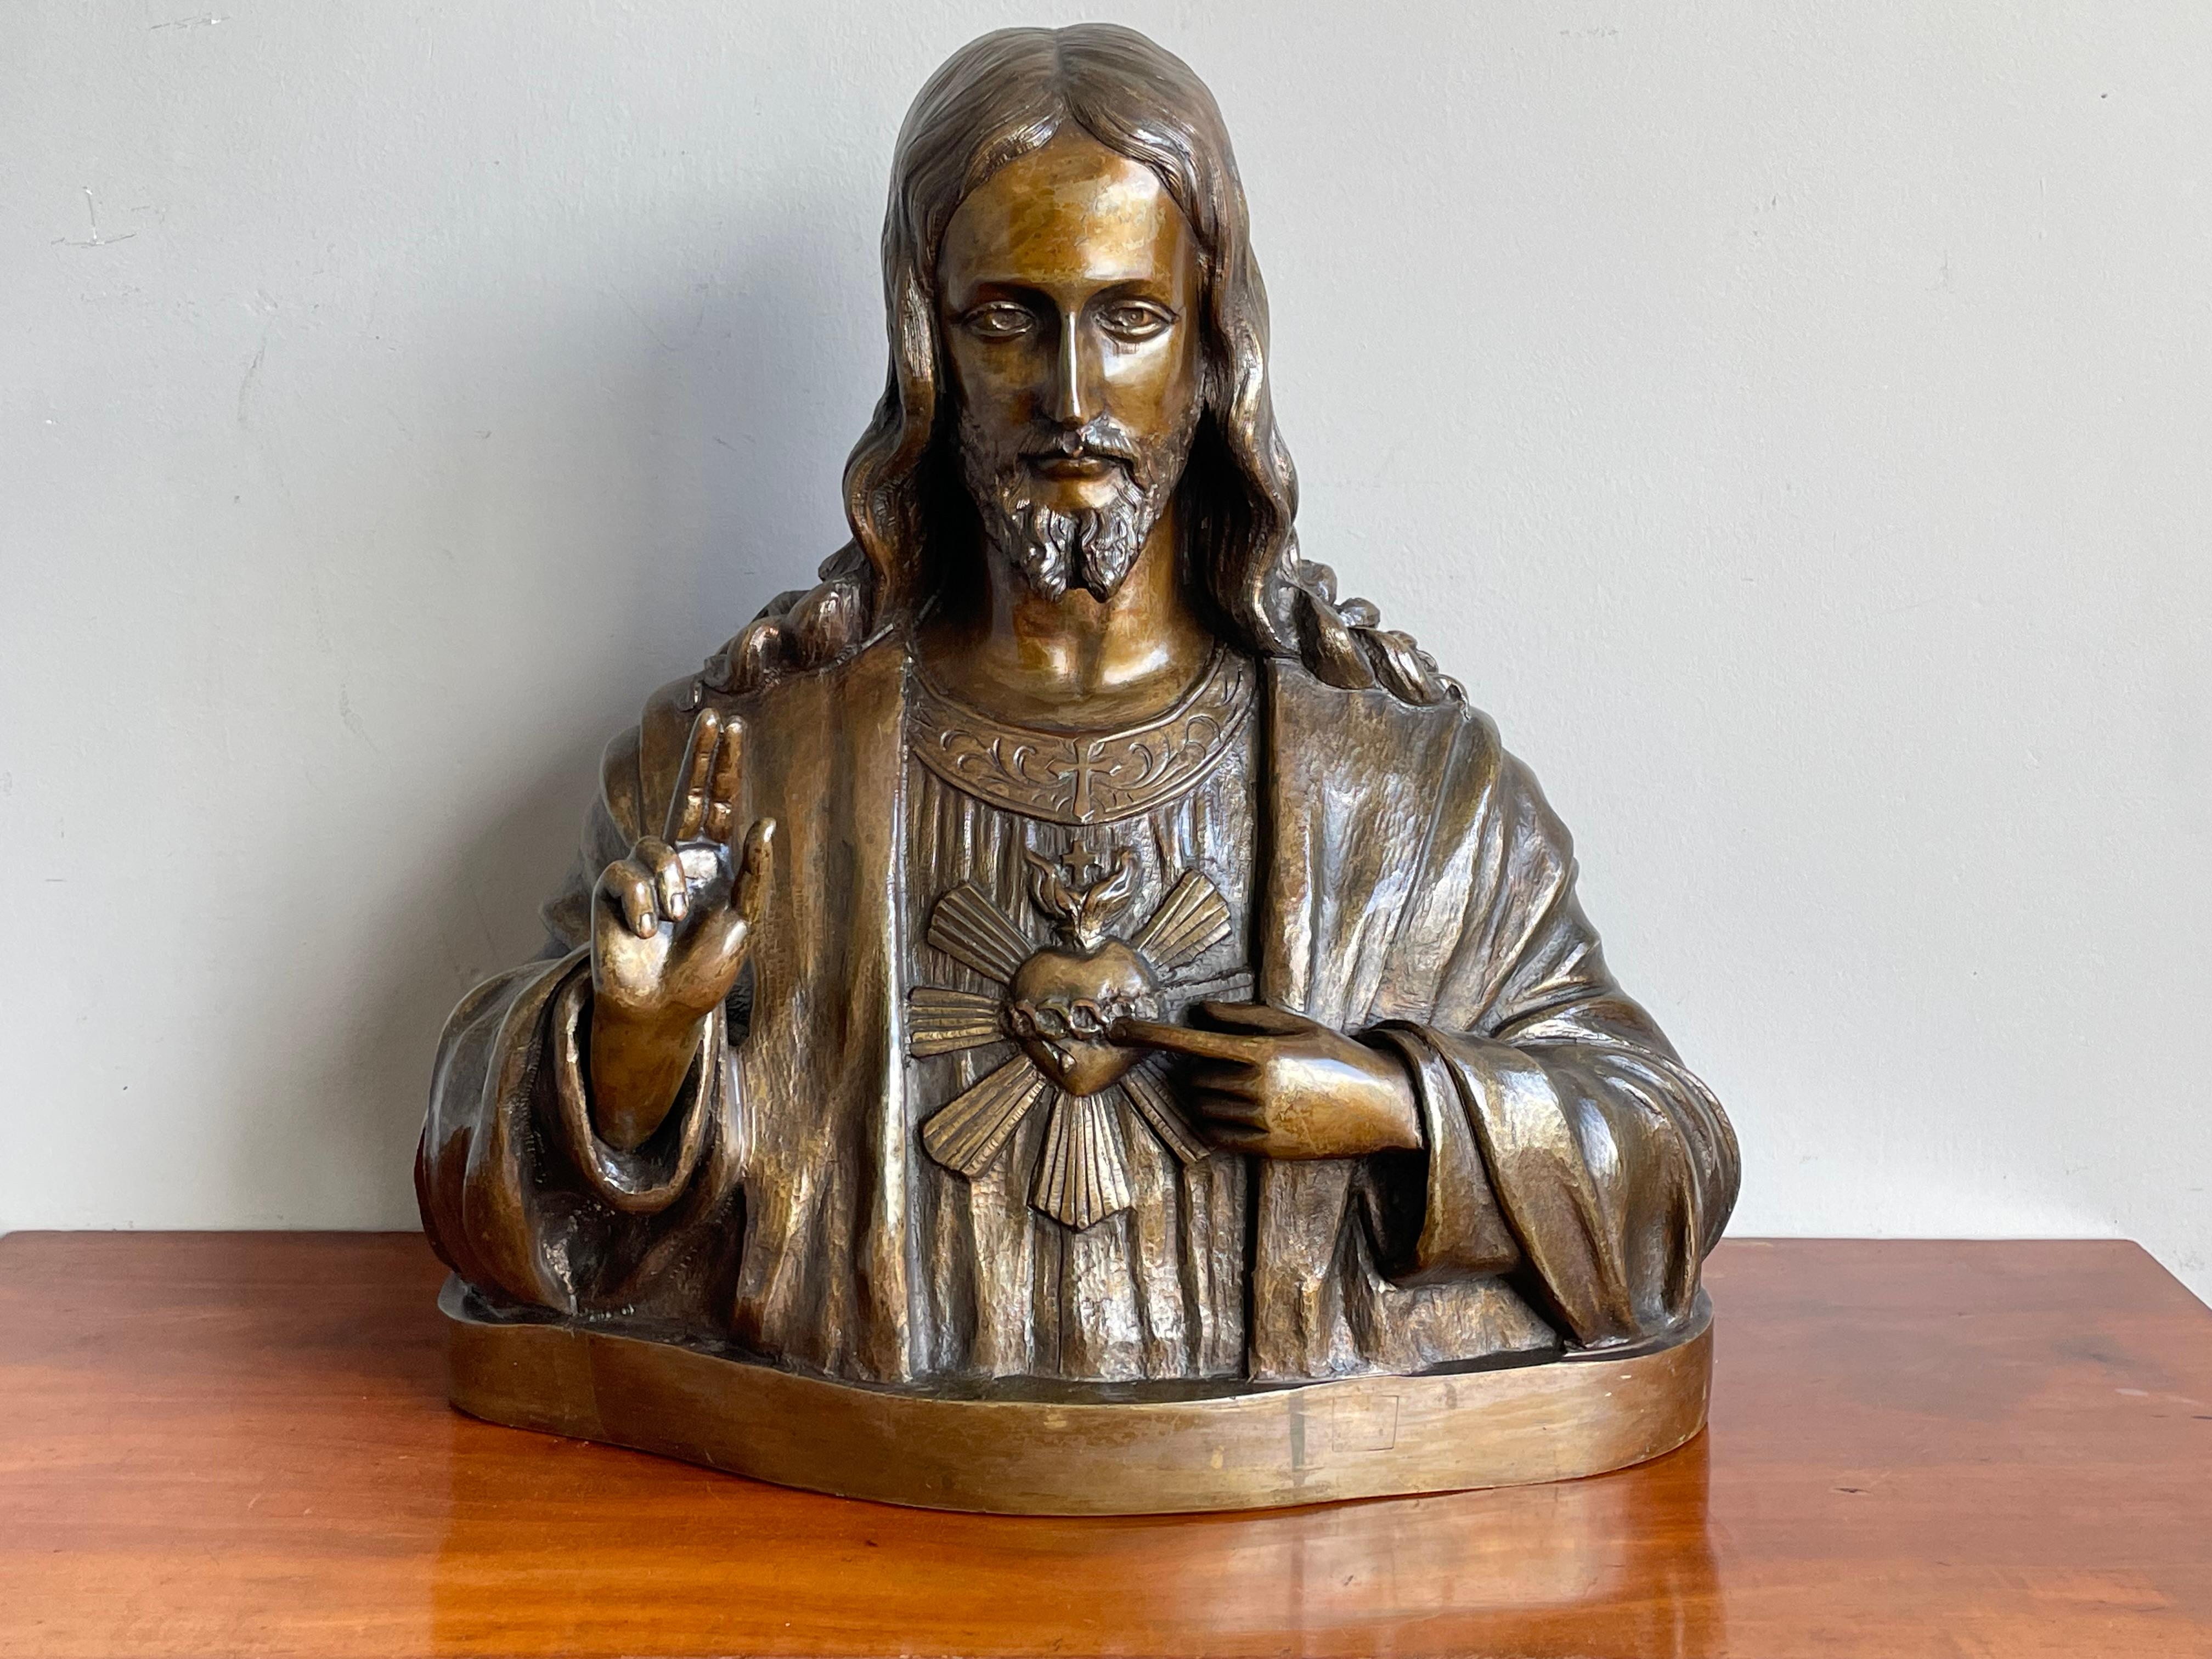 Rare Antique Bronze Holy Heart Sculpture / Bust of Our Lord Jesus Christ 1920 For Sale 10